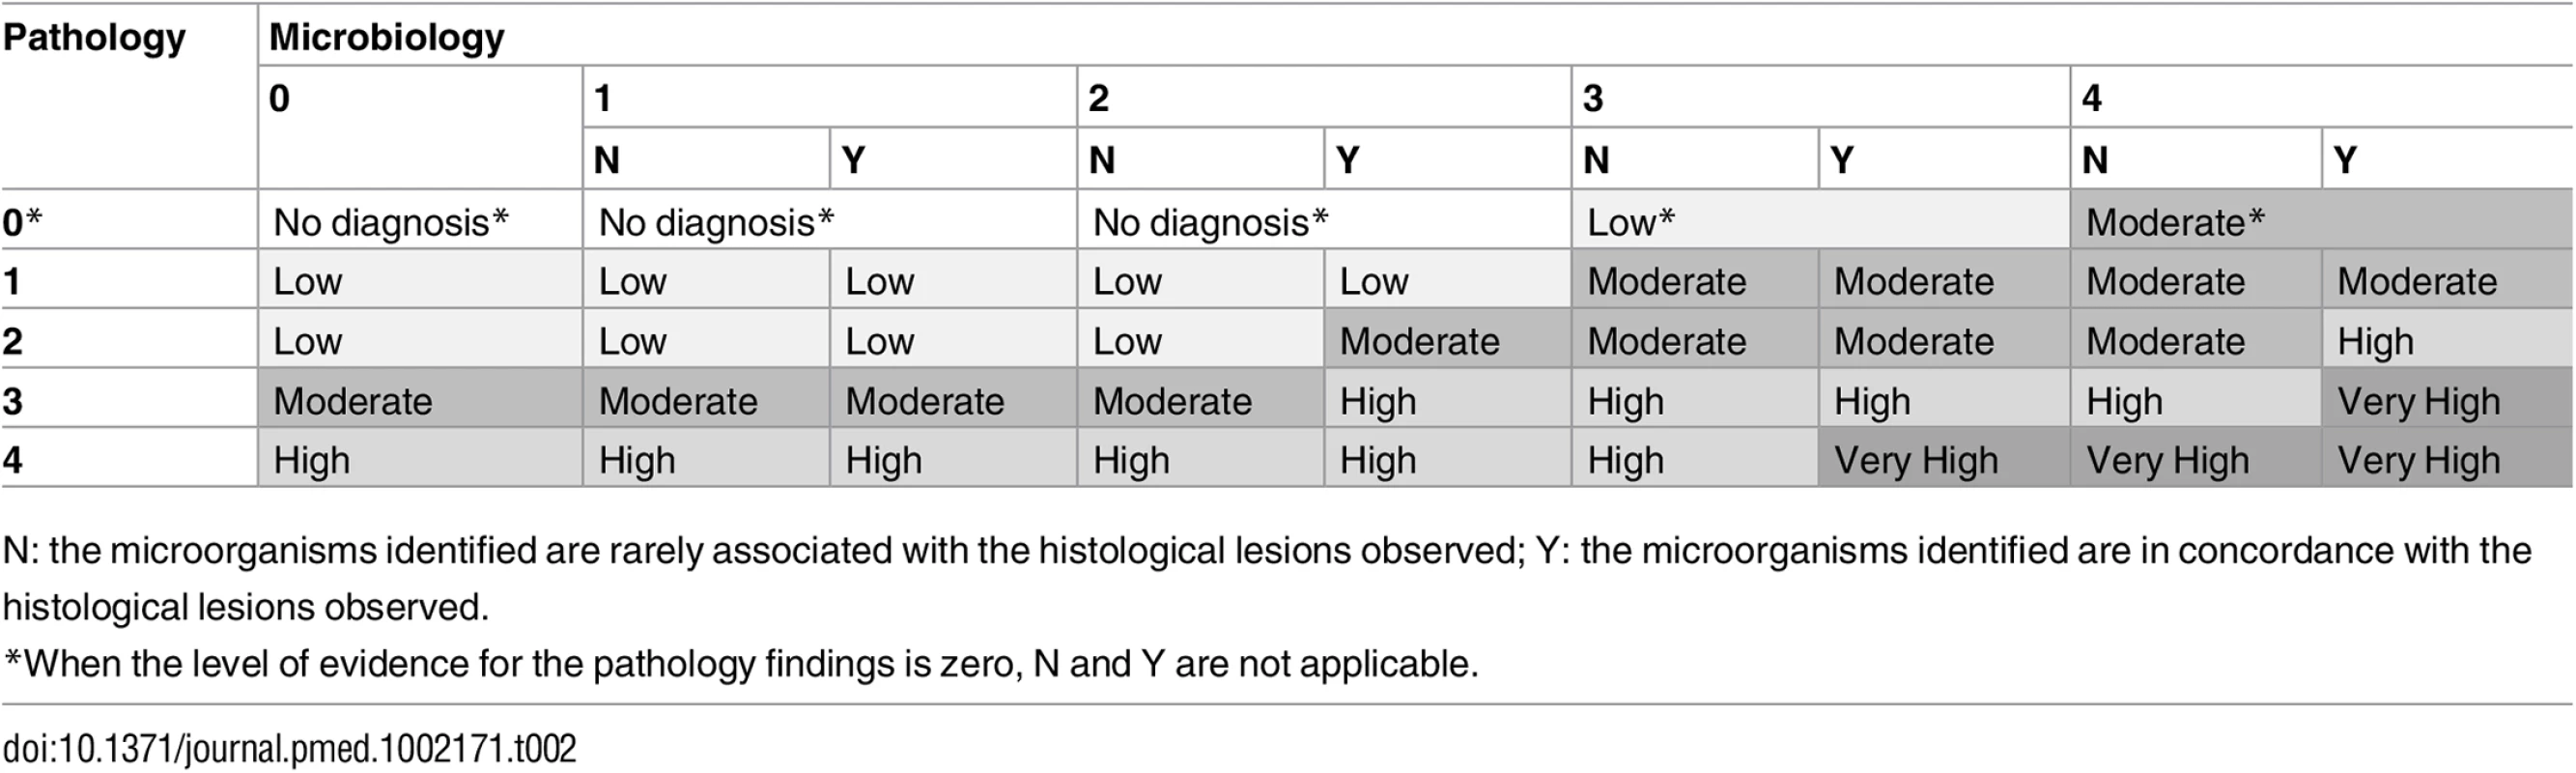 Level of certainty of the diagnosis of cause of death obtained by combination of the strength of the evidence of the pathological and microbiological findings.